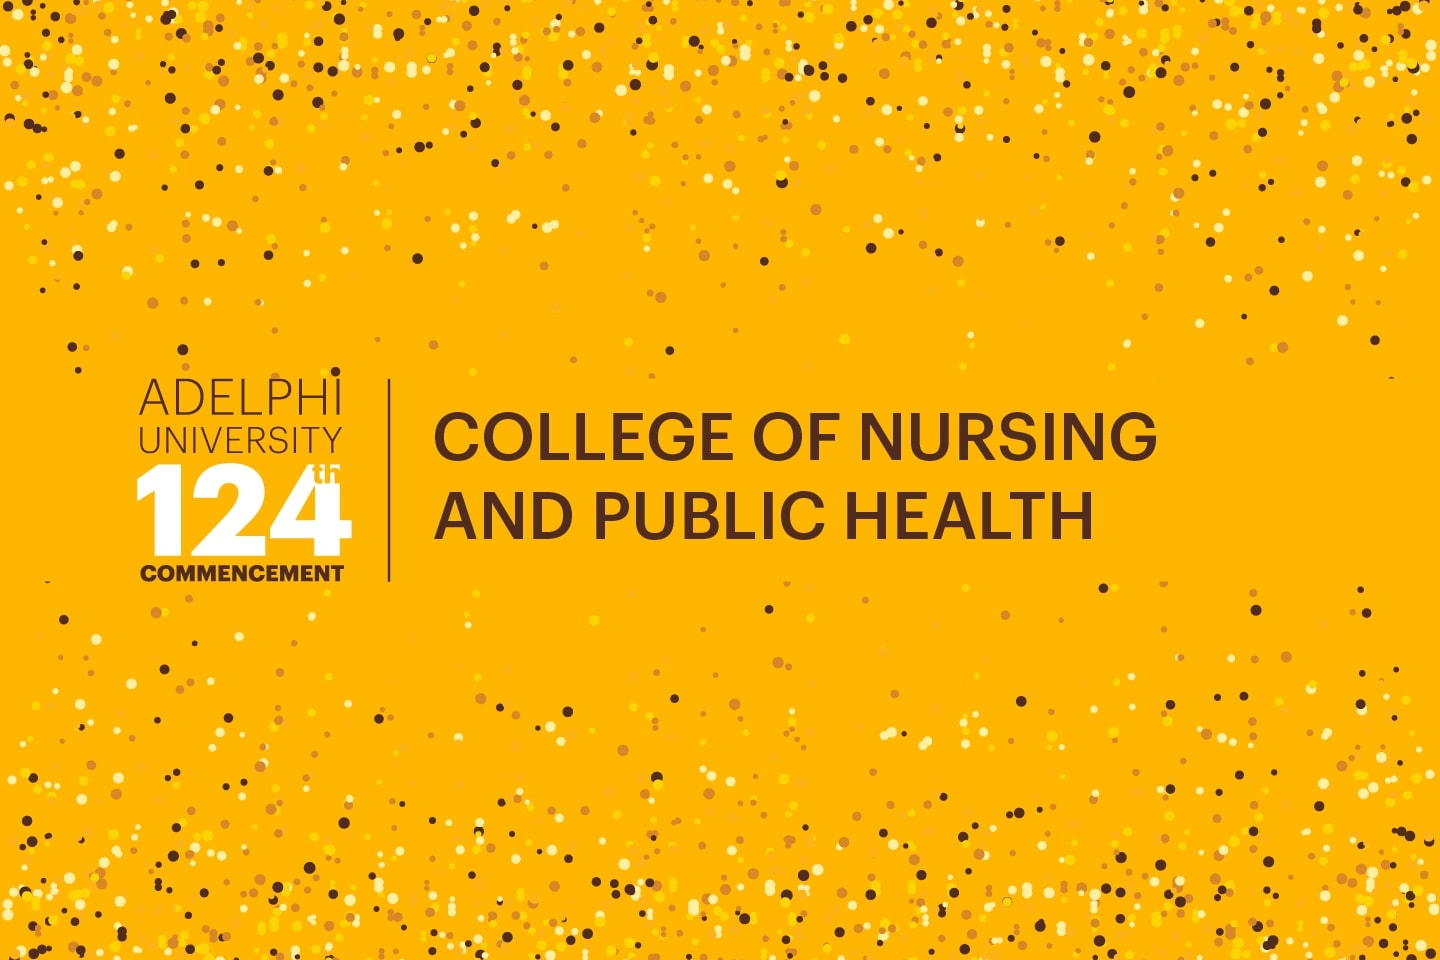 Adelphi University 124th Commencement: College of Nursing and Public Health